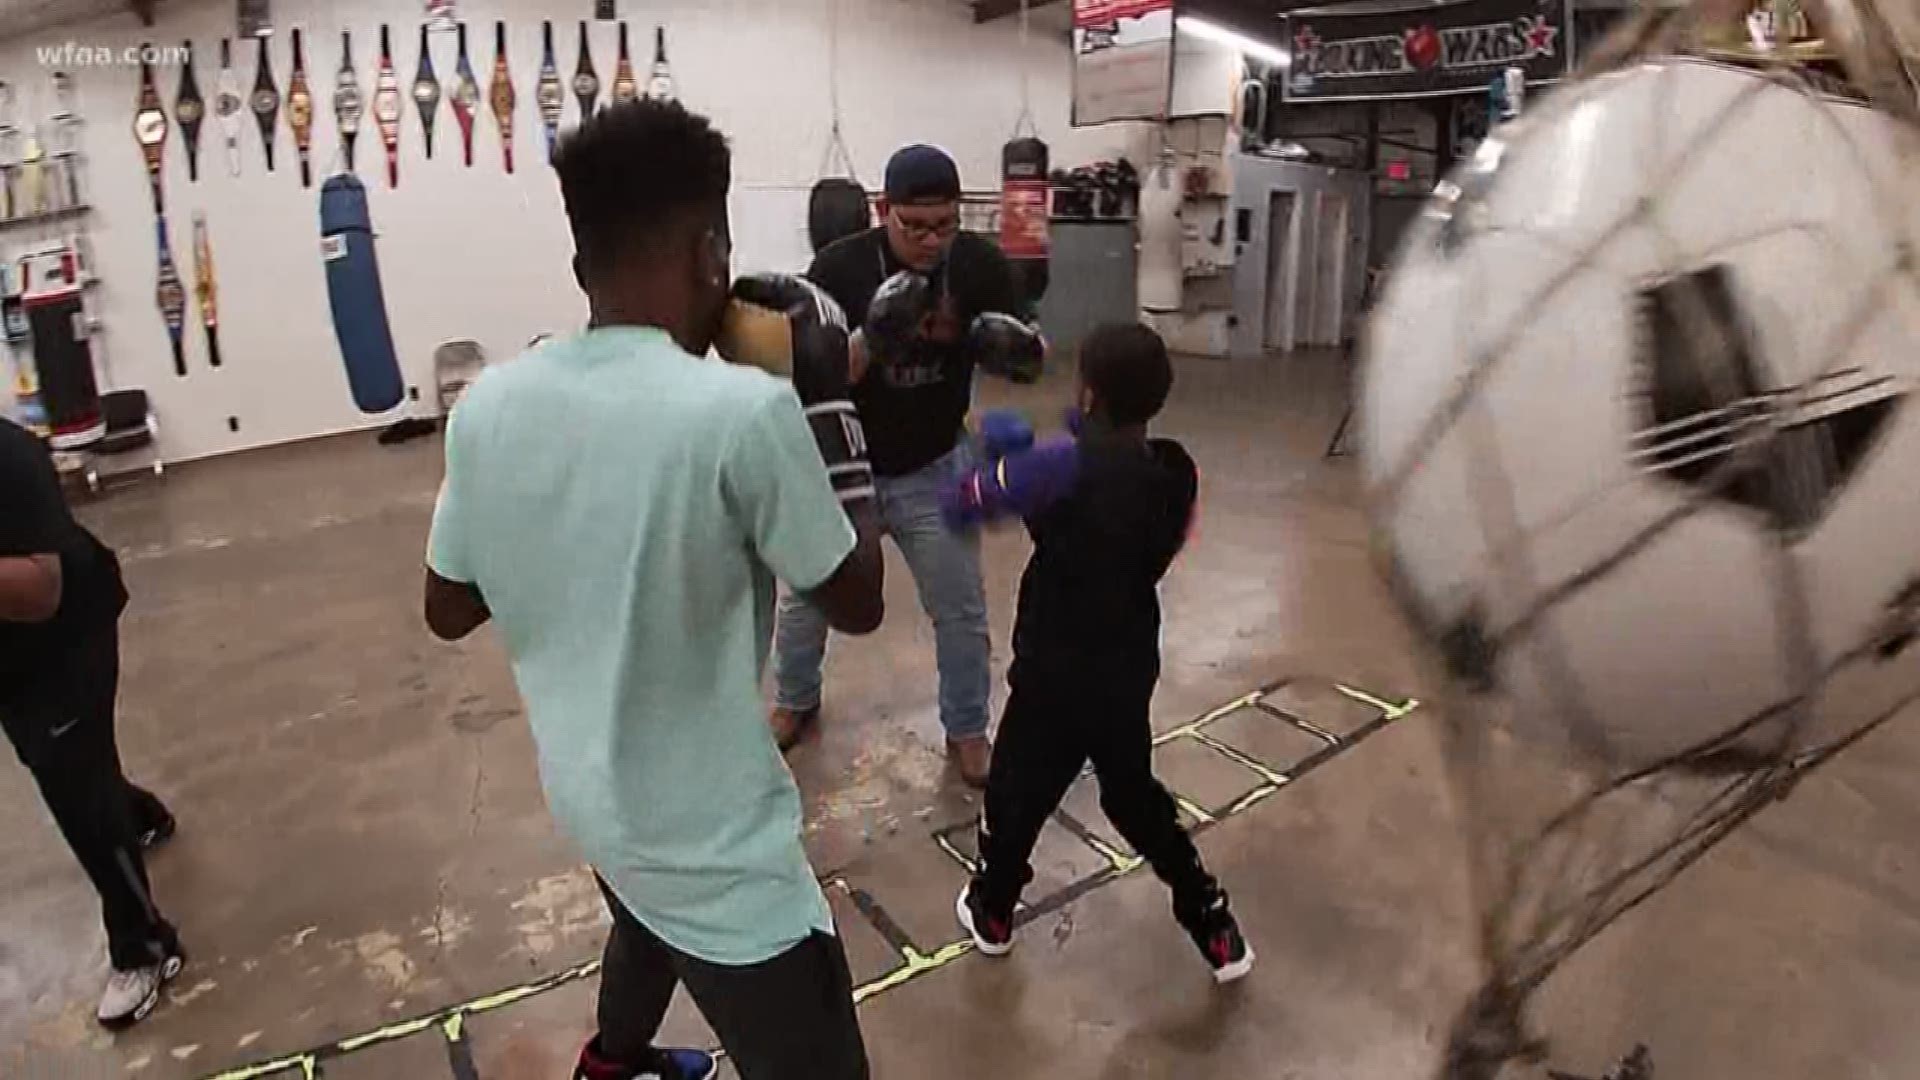 These three brothers in Mesquite are fighting back through boxing. Their parents started an organization to raise awareness against guns.